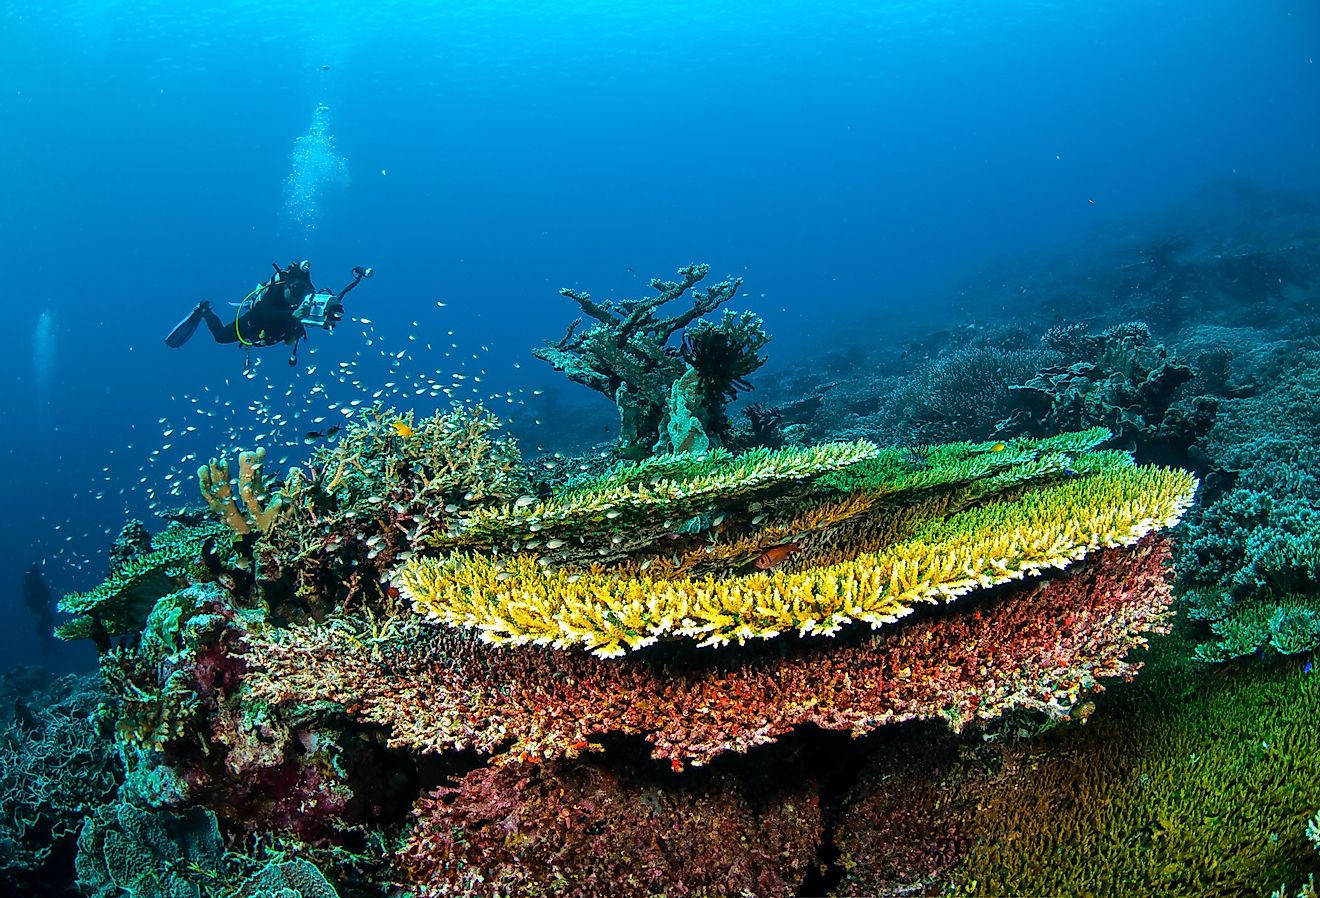 Diver and various hard coral reefs in Banda, Indonesia.